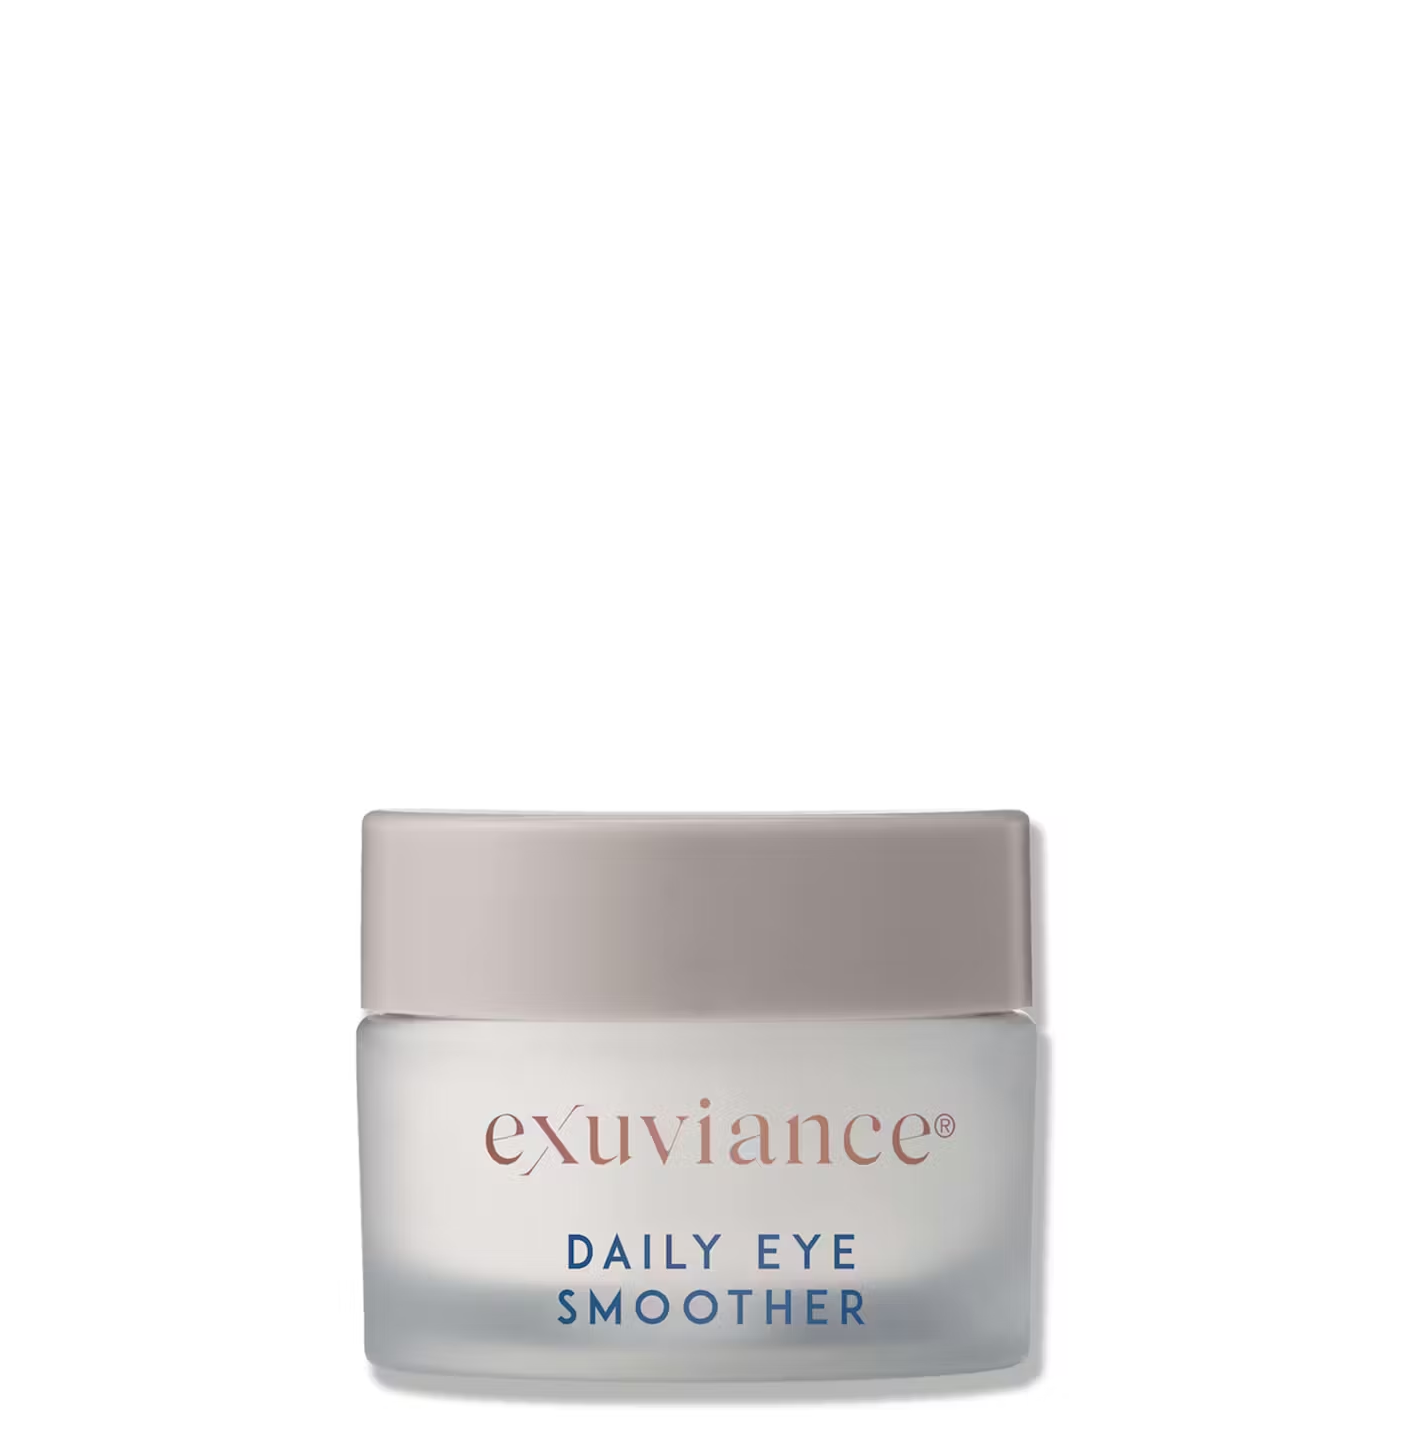 Se Exuviance Daily Eye Smoother hos Staybeautiful